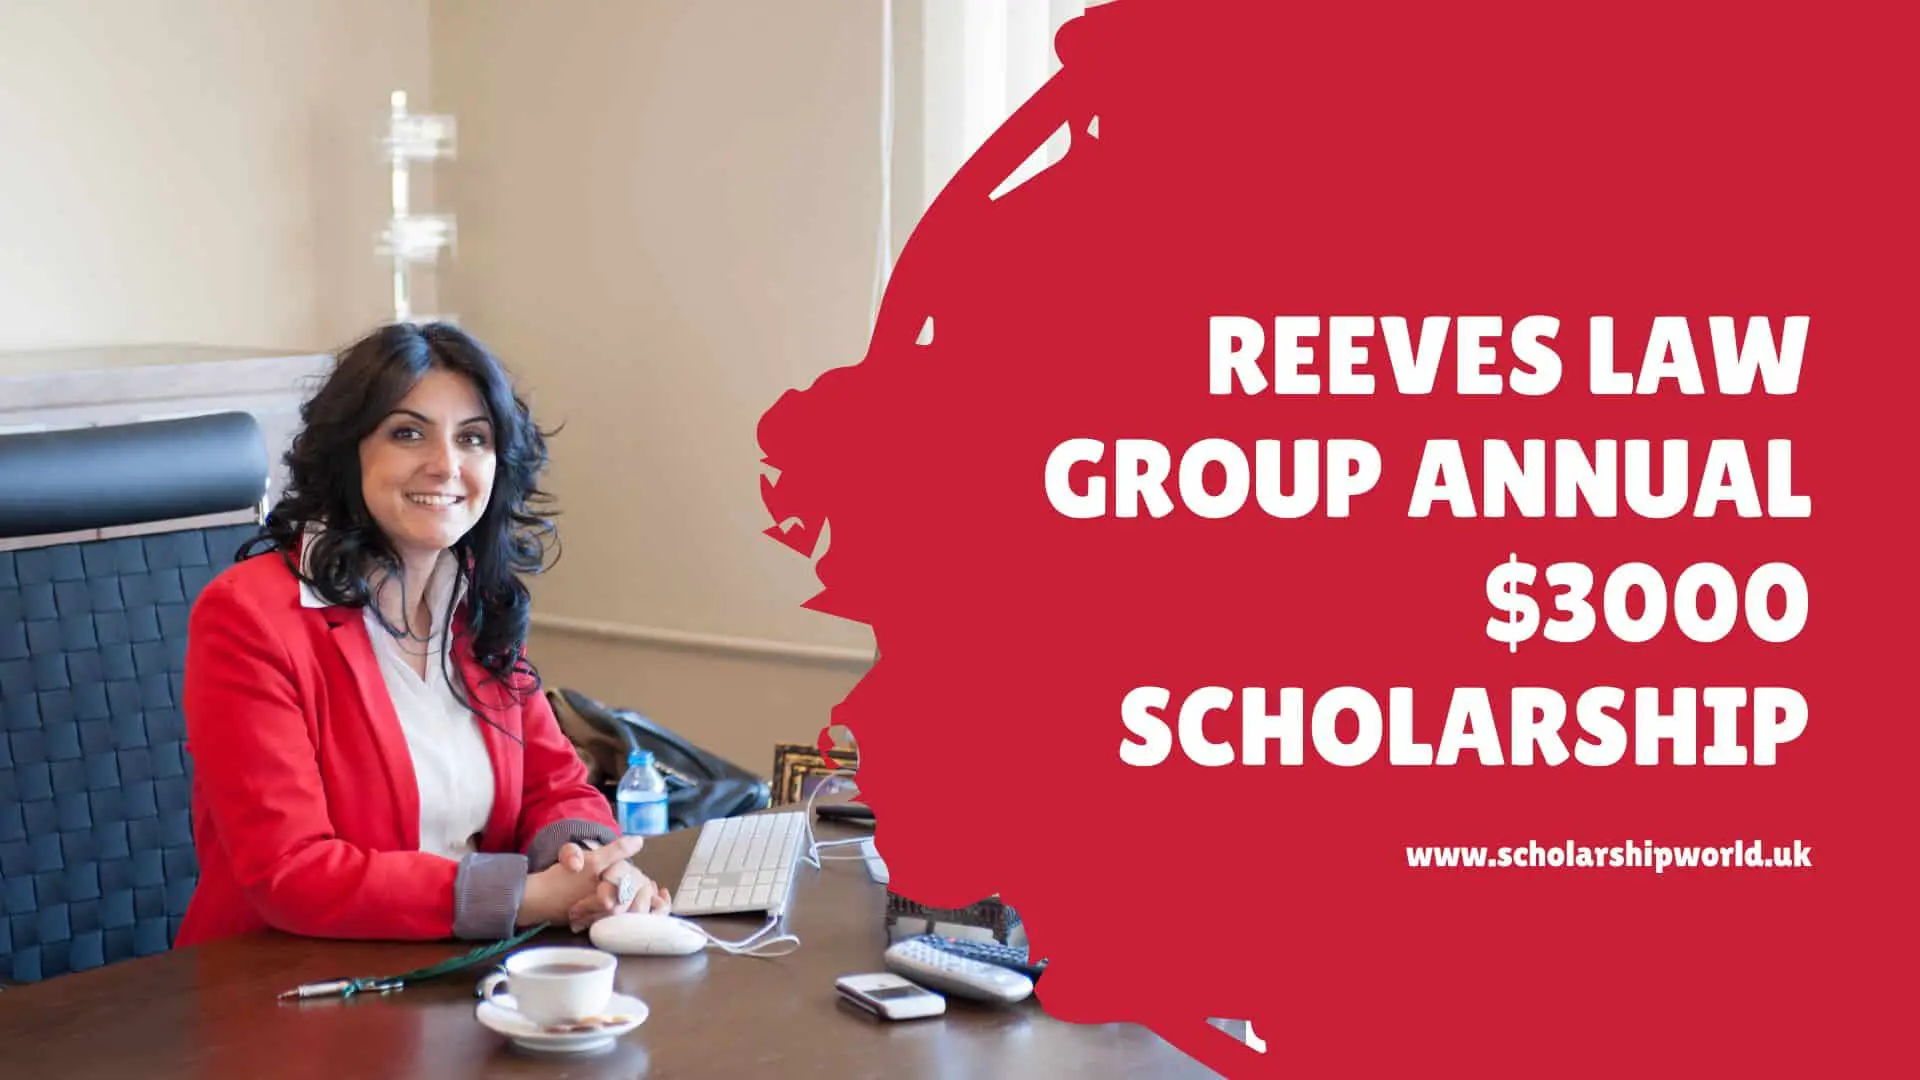 The Reeves Law Group Annual $3000 Scholarship 2023